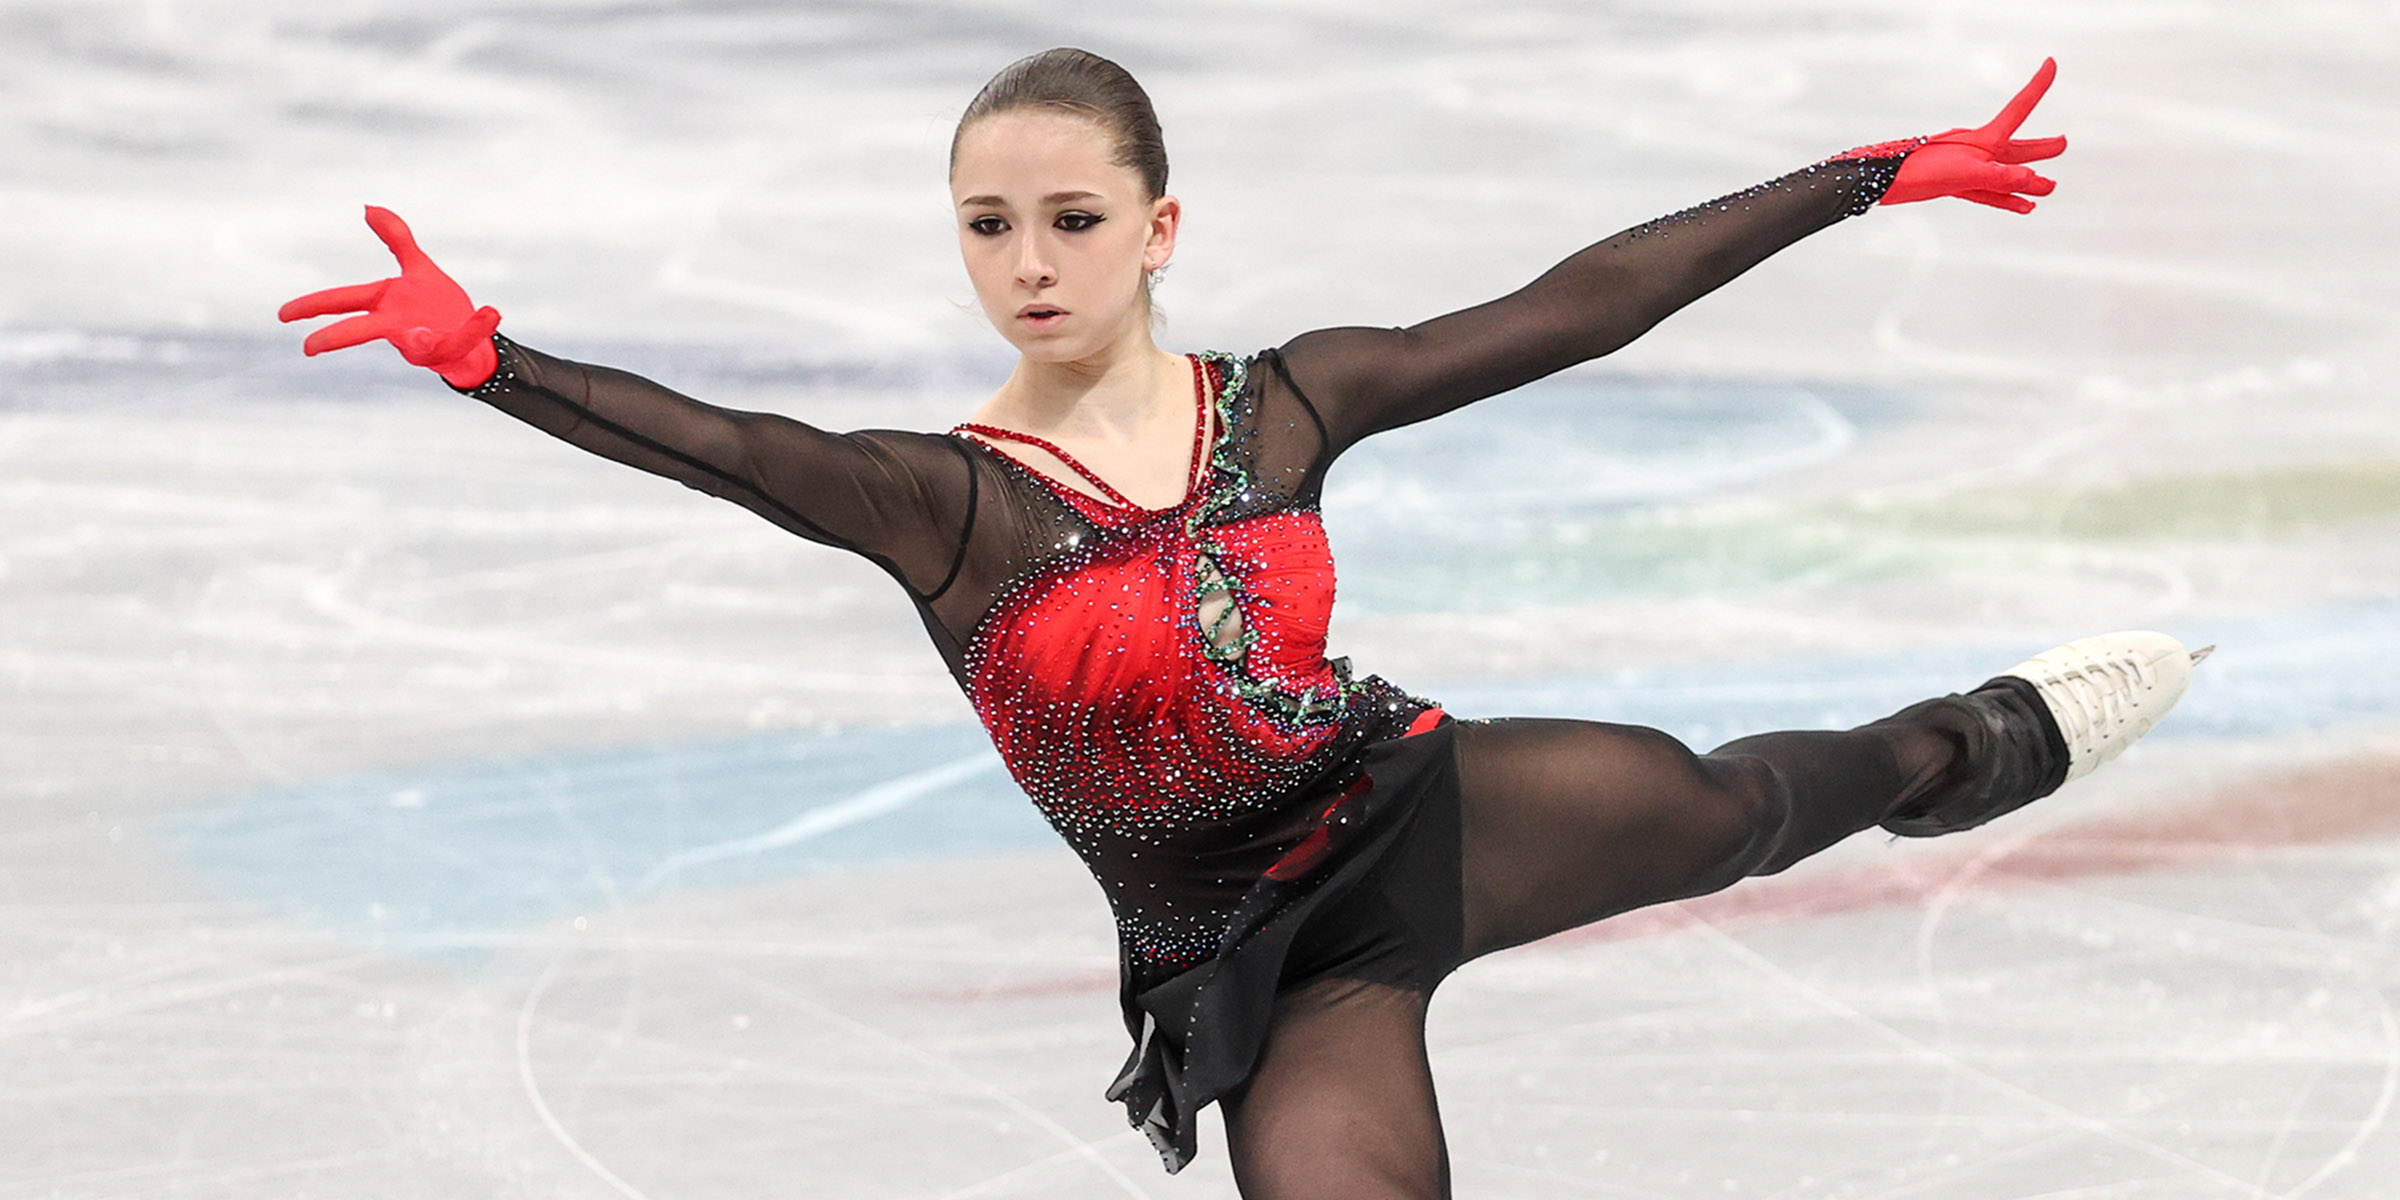 Single Skating: Kamila Valieva, The first female skater to break the 250-, 260- and 270-point thresholds in the total score. 2400x1200 Dual Screen Wallpaper.